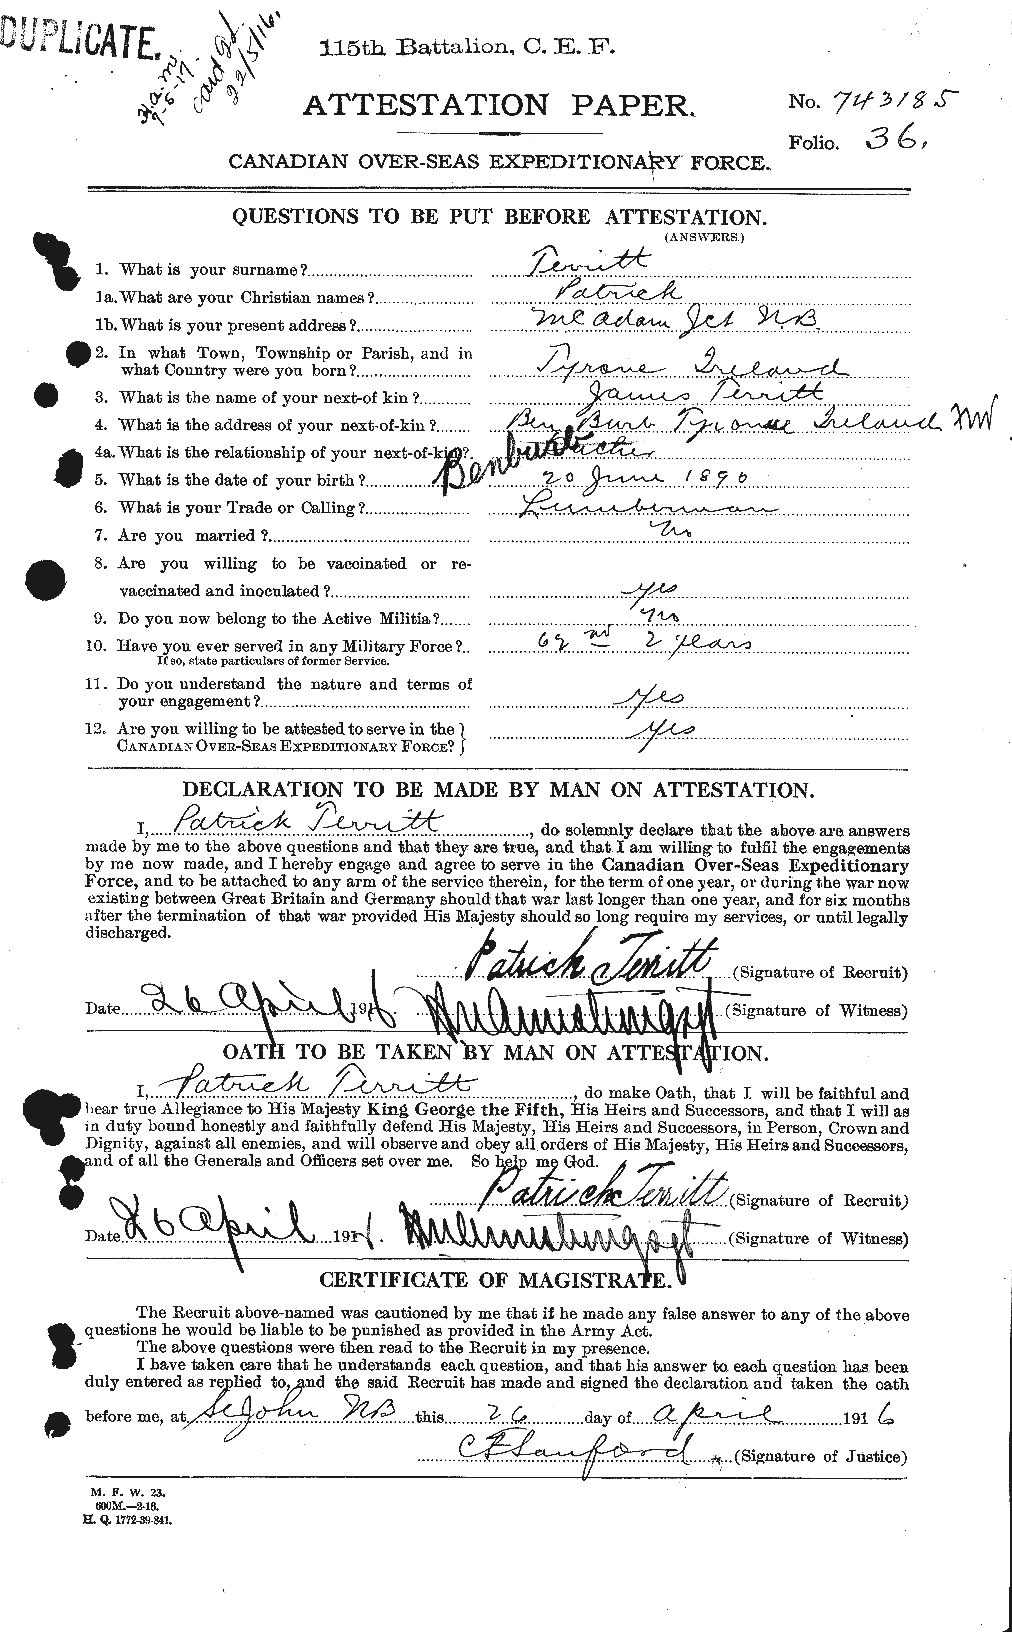 Personnel Records of the First World War - CEF 629228a